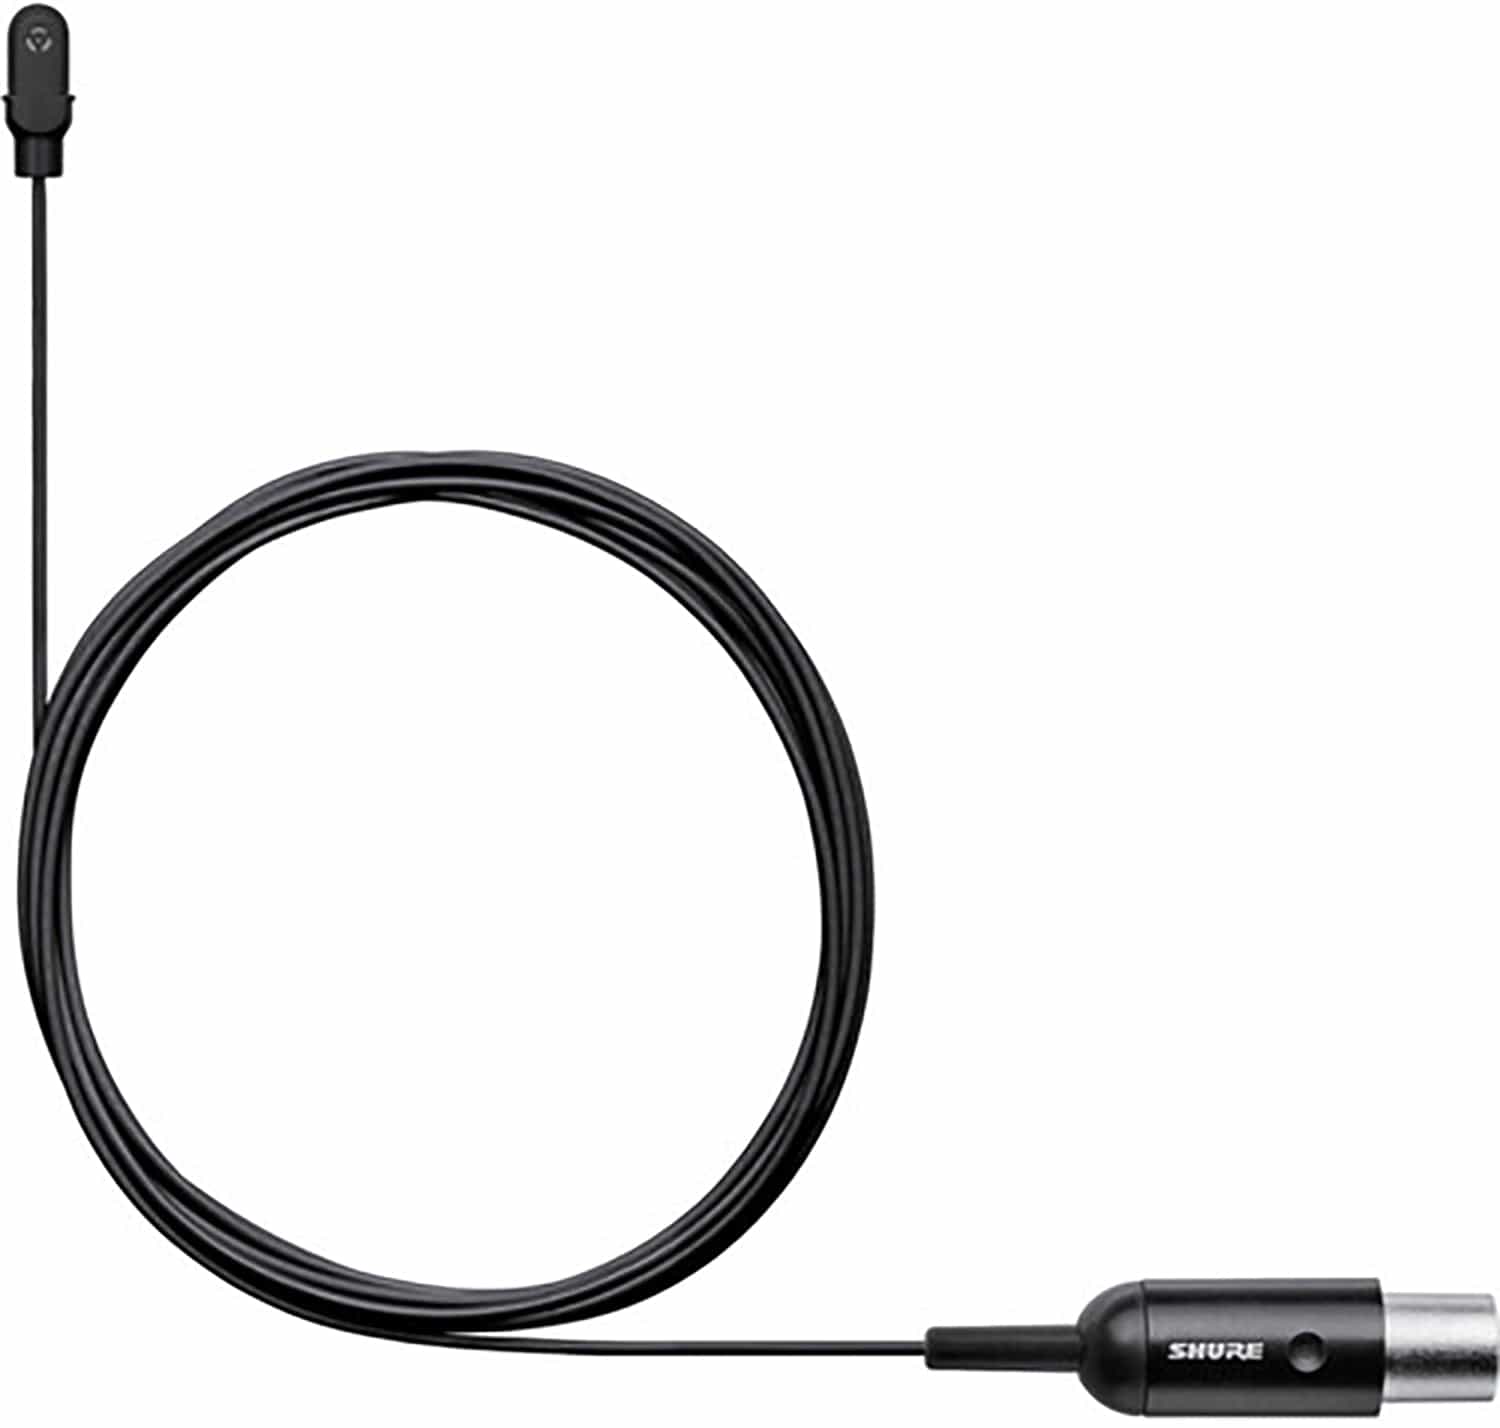 Shure SLXD14 Wireless System w/ SLXD1 Bodypack Transmitter and DL4 Lavalier Microphone, J52 Band - PSSL ProSound and Stage Lighting